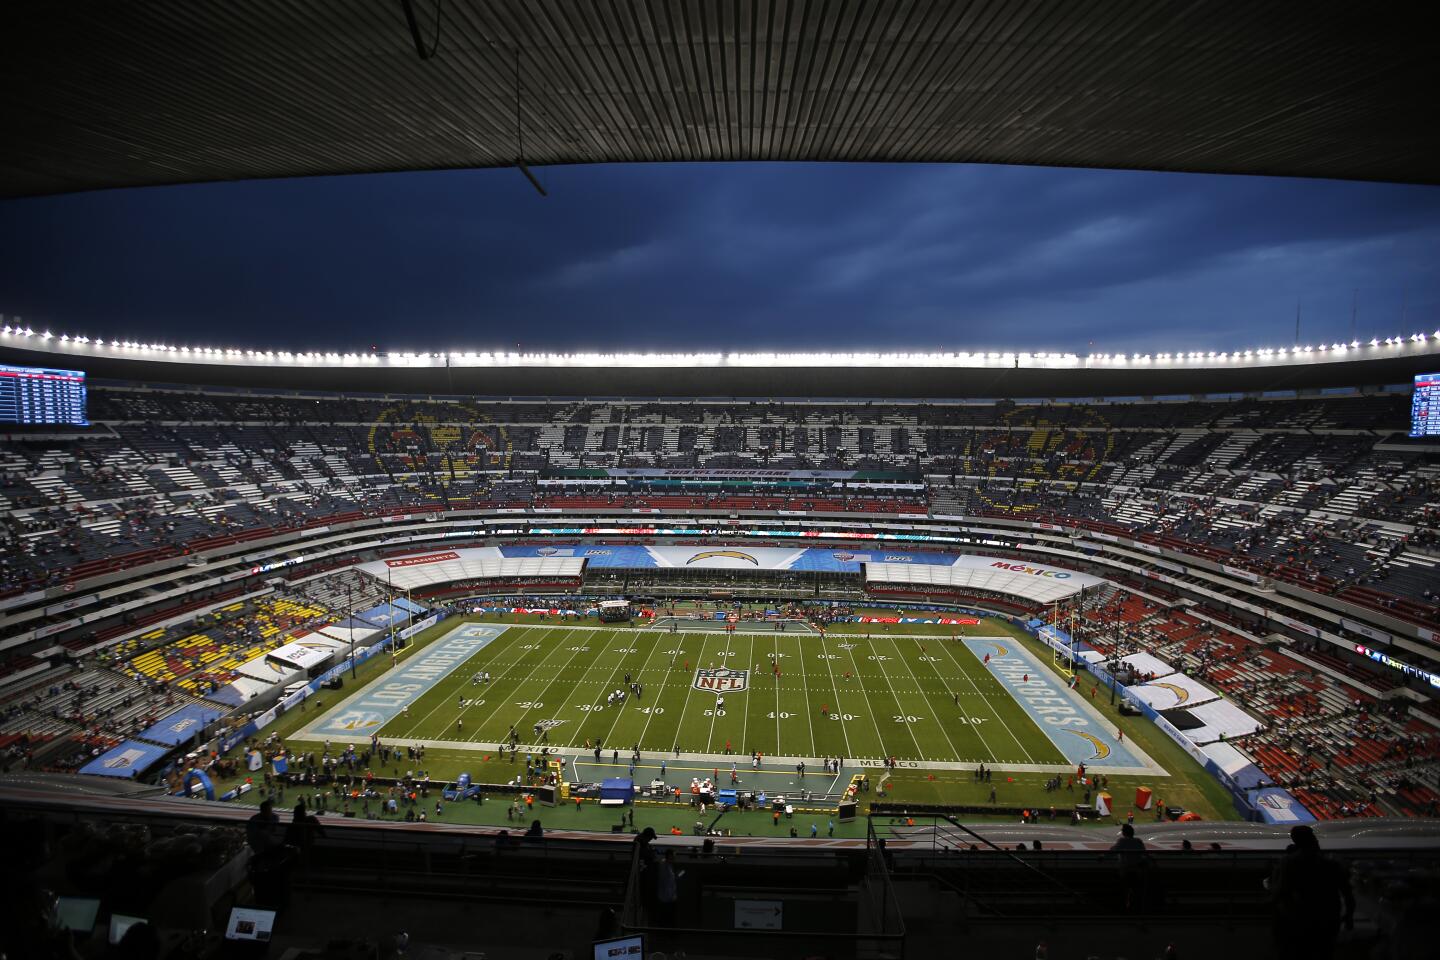 Players for the Chargers and Chiefs warm up before an NFL game Nov. 18 at Estadio Azteca in Mexico City.